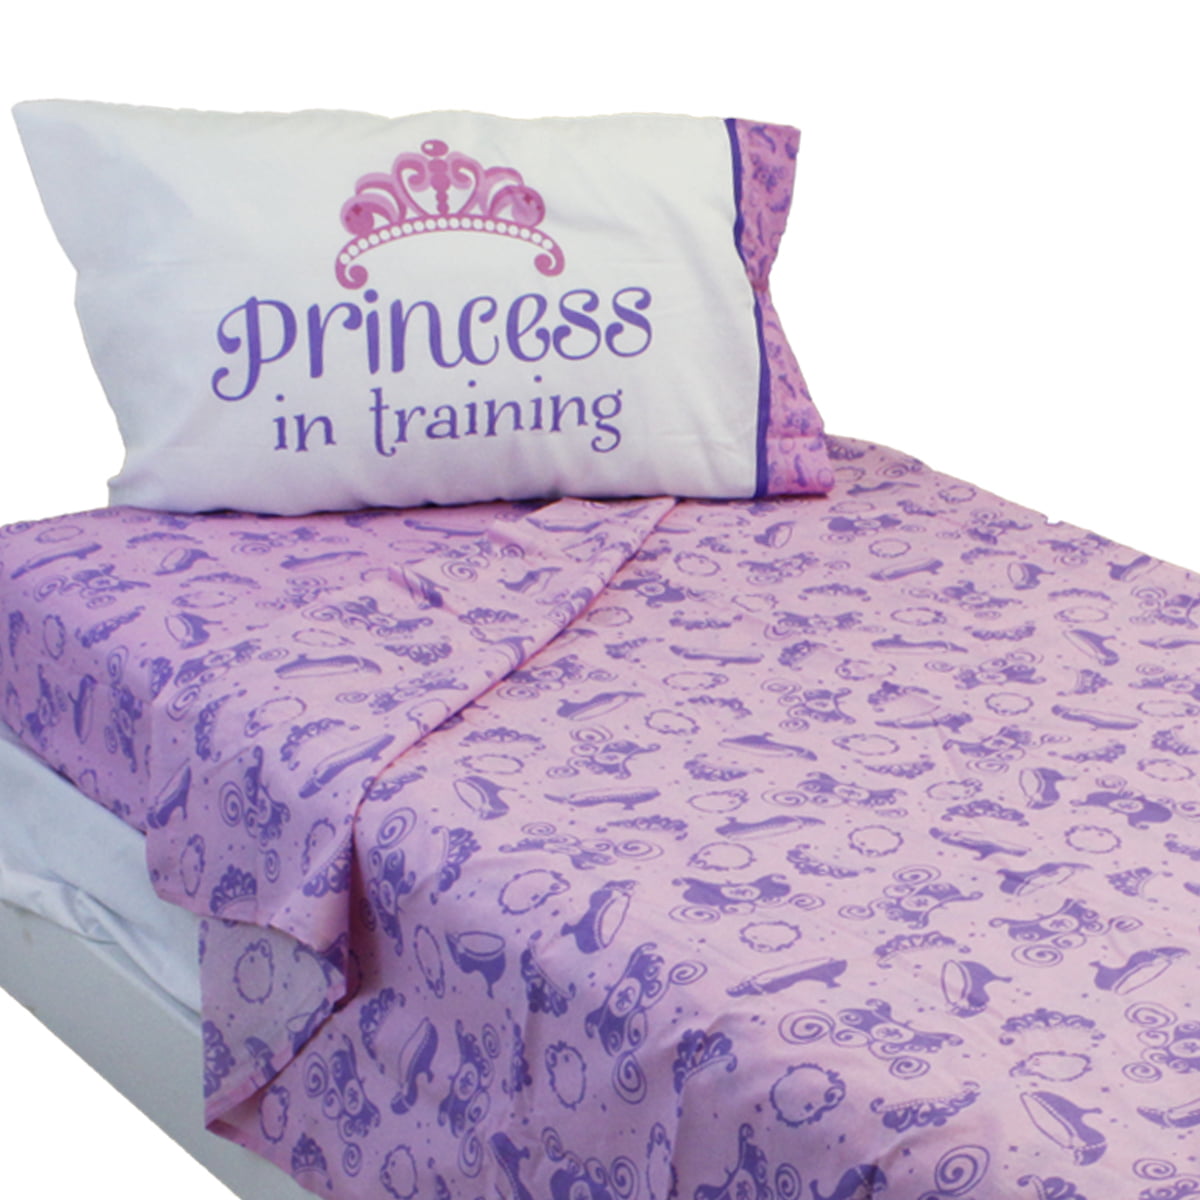 Bed Sheets Disney Sofia the 1st Twin Sheet Set Every Good Deed is Magic